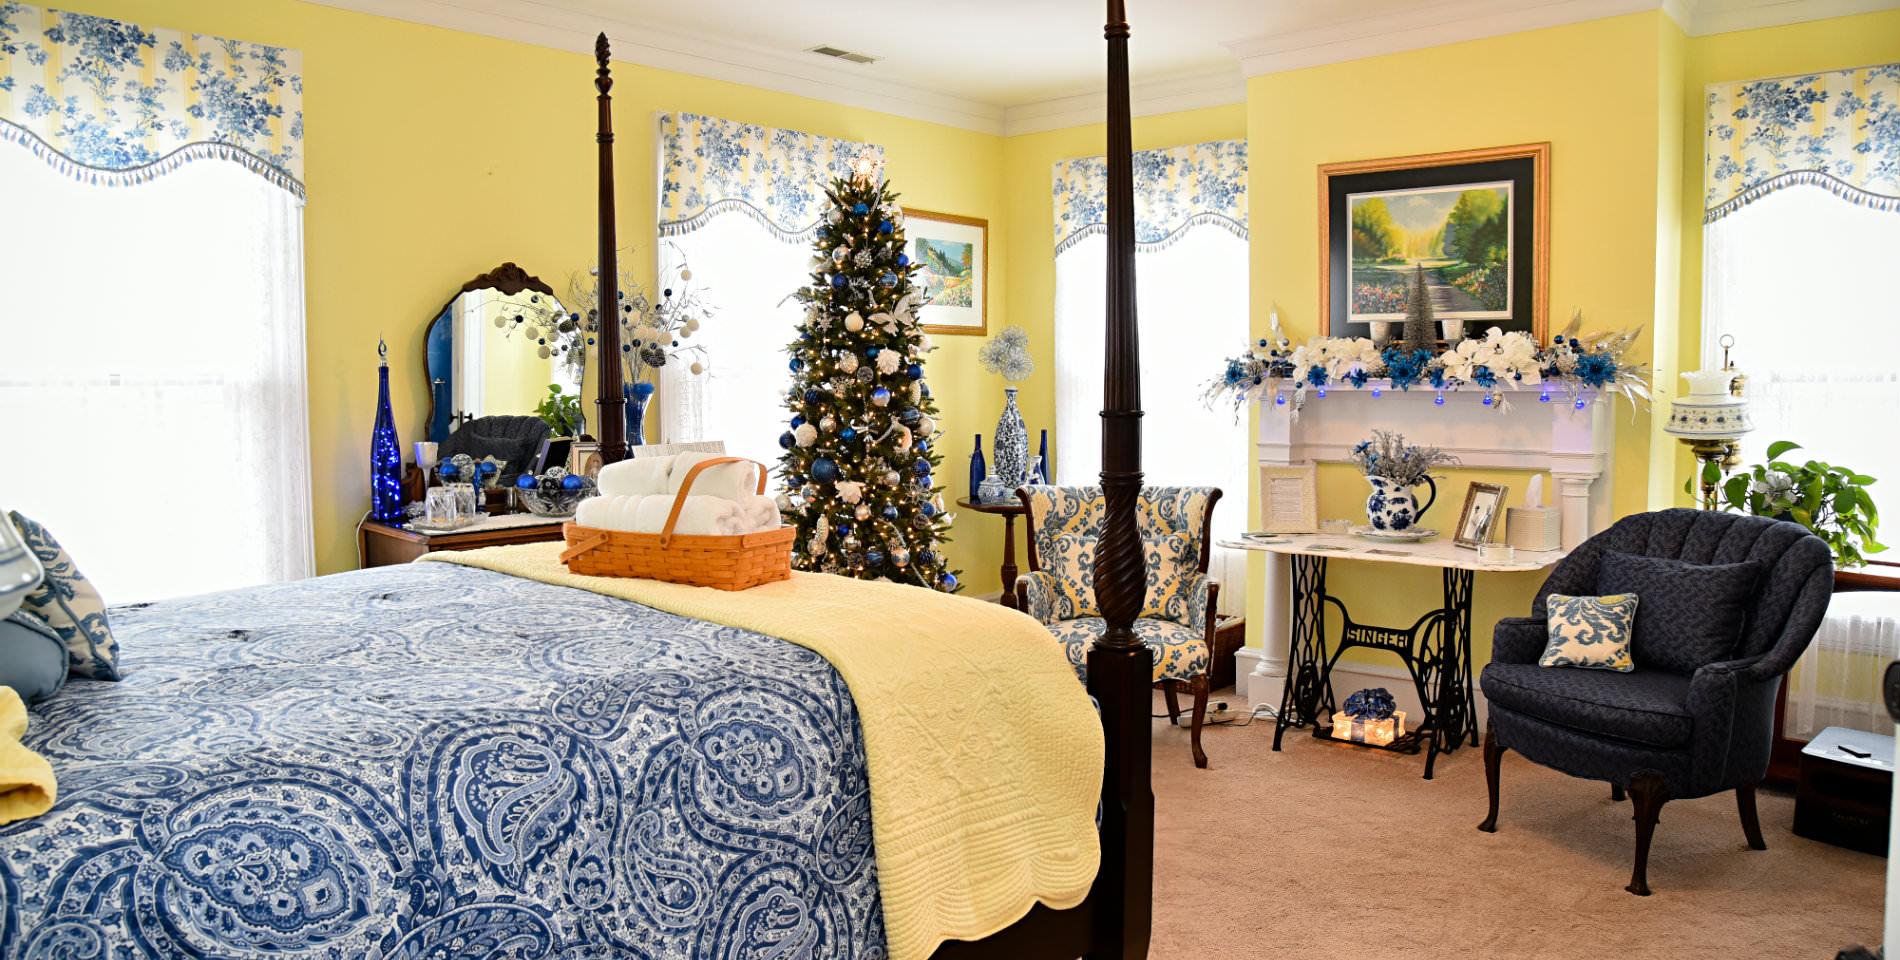 A basket of plush white towels in a wood basket on the foot of the bed, festive decorations in the room. 